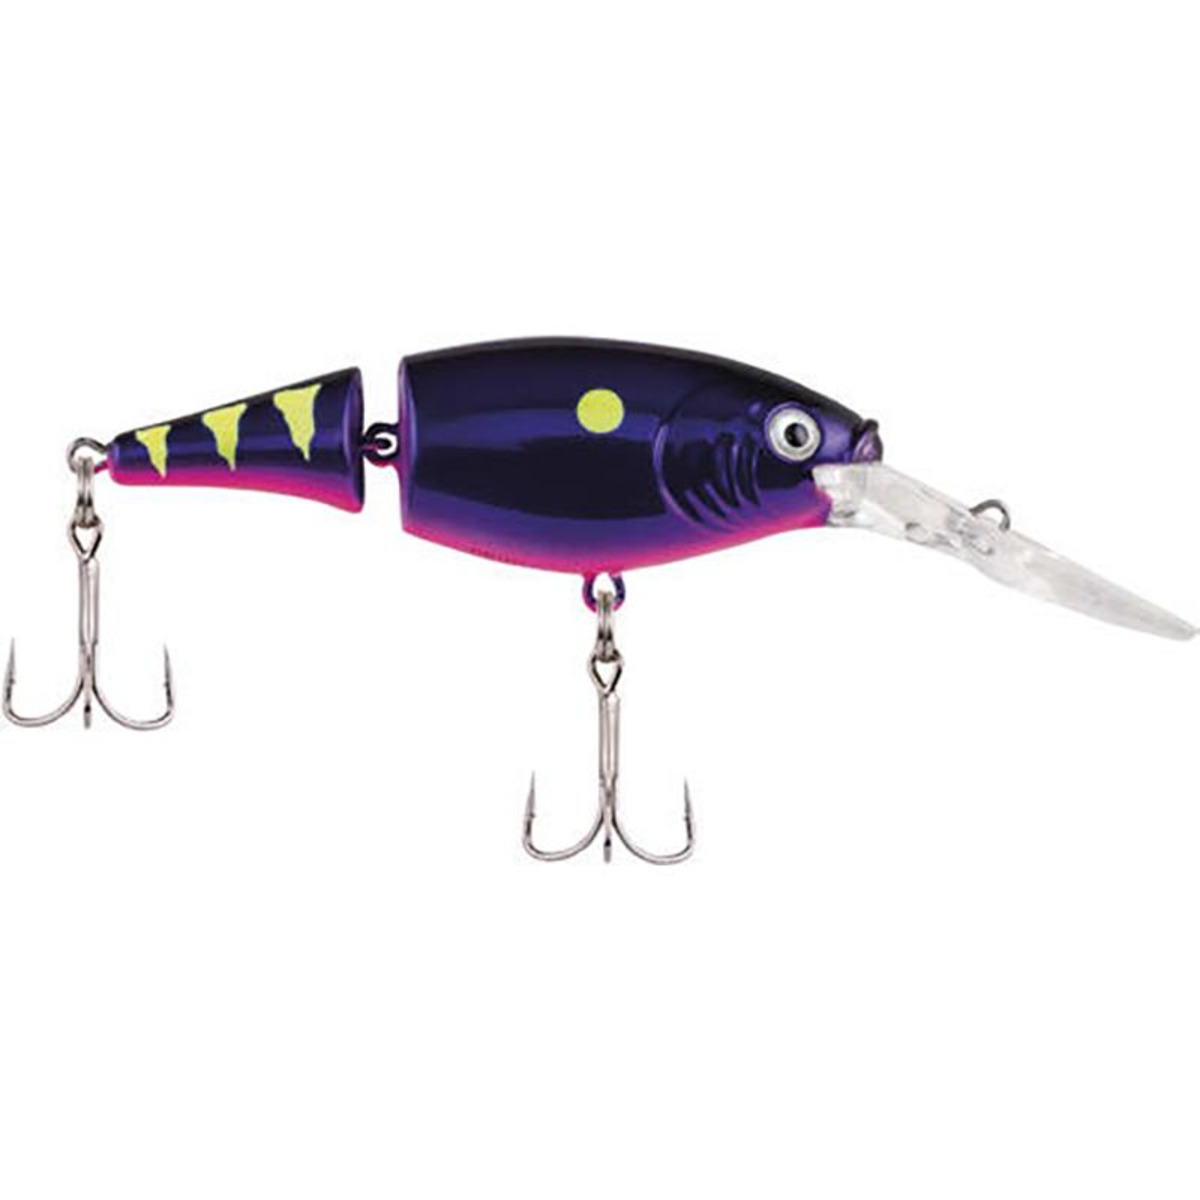 Berkley Flicker Shad Jointed Fire Tail - 7 cm - 8.5 g - Chrome Candy